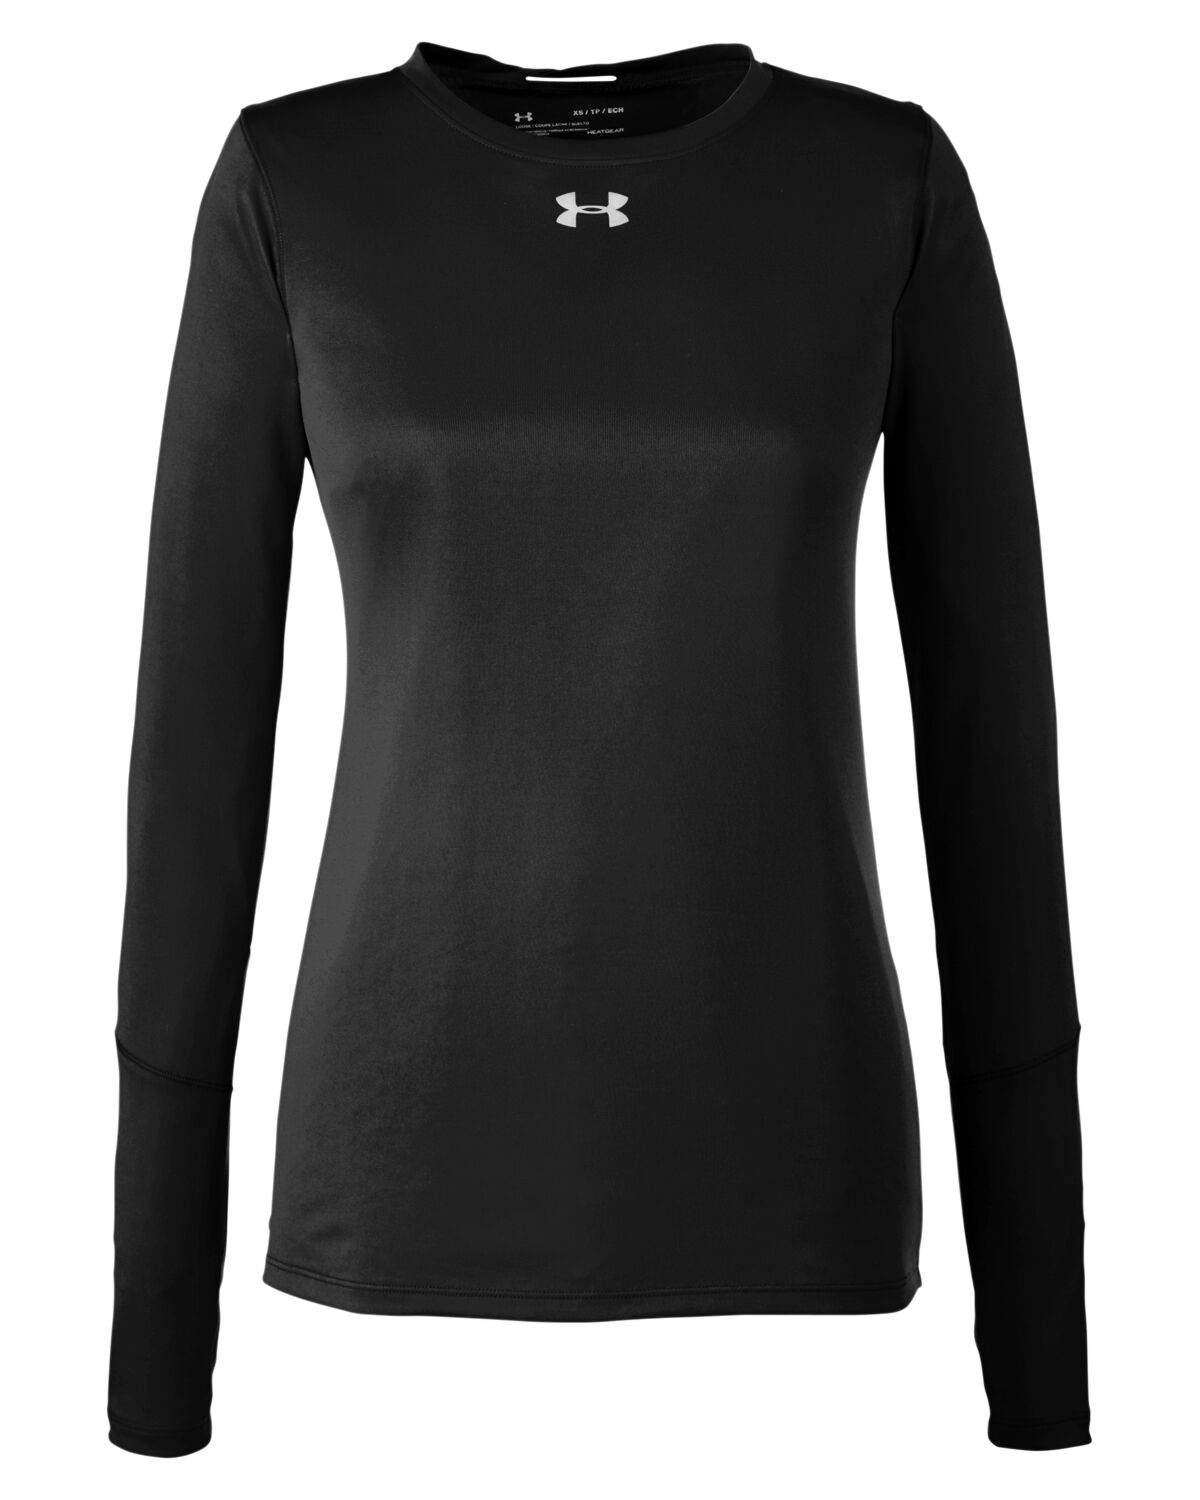 Black Under Armour T-Shirts For Women